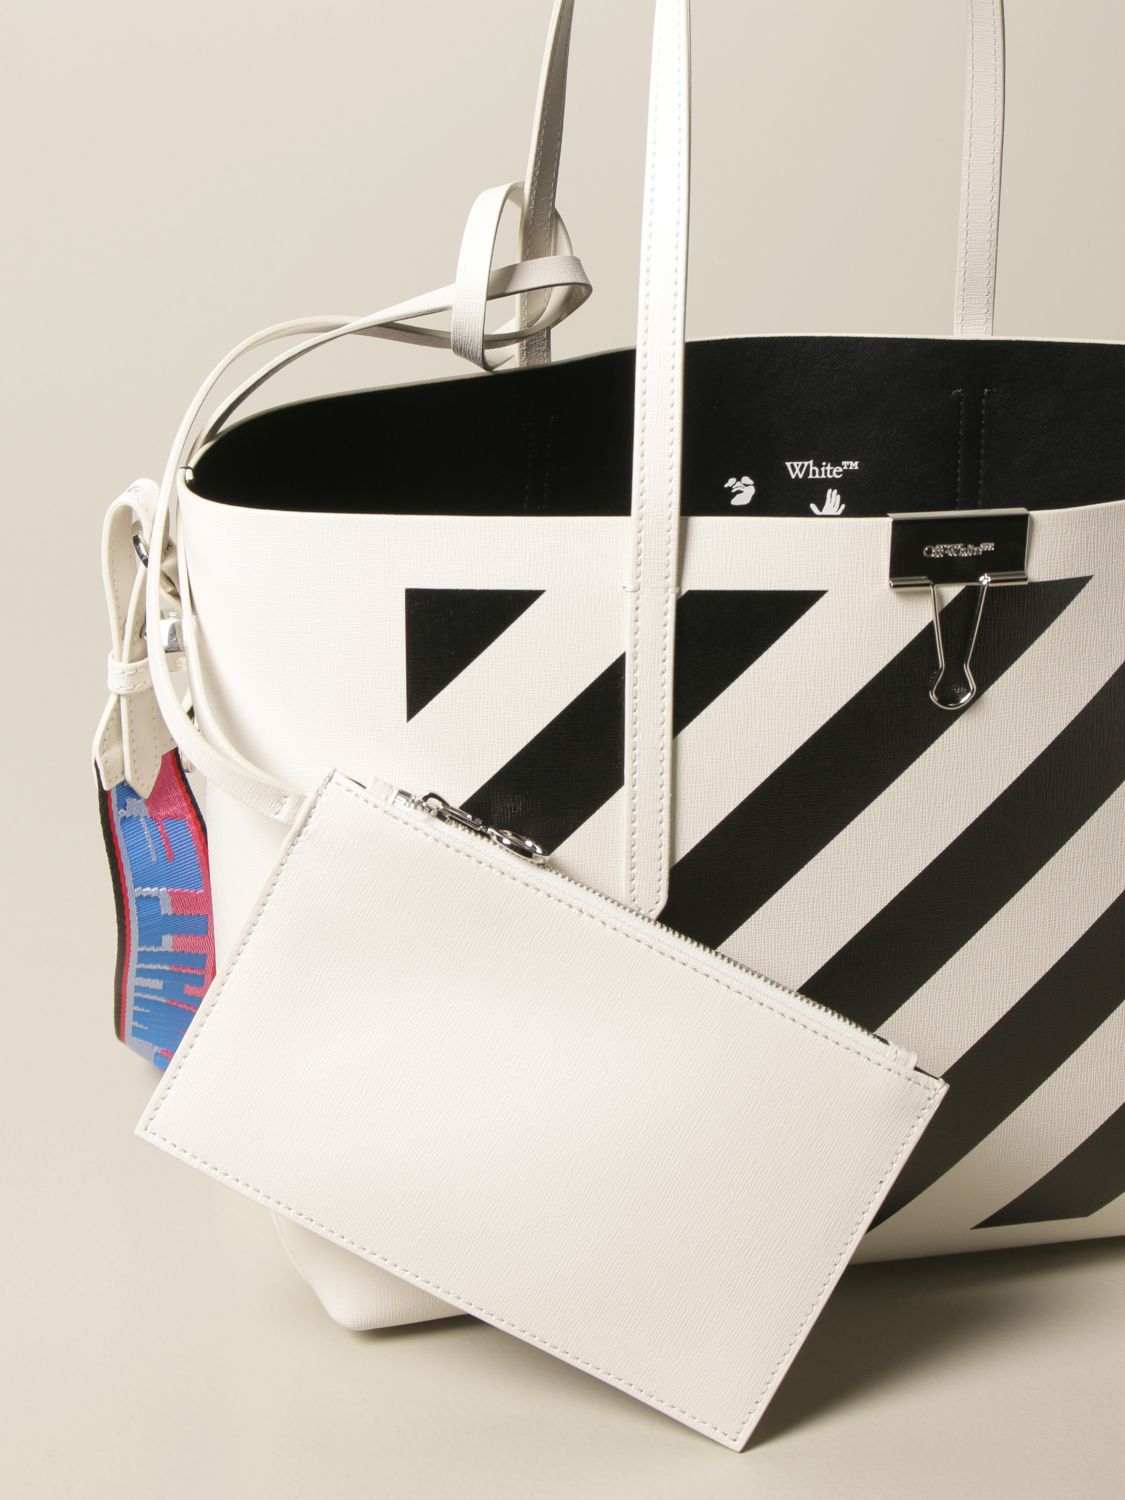 OFF-WHITE: Diag Off White belt bag in saffiano leather with diagonal print  - Black